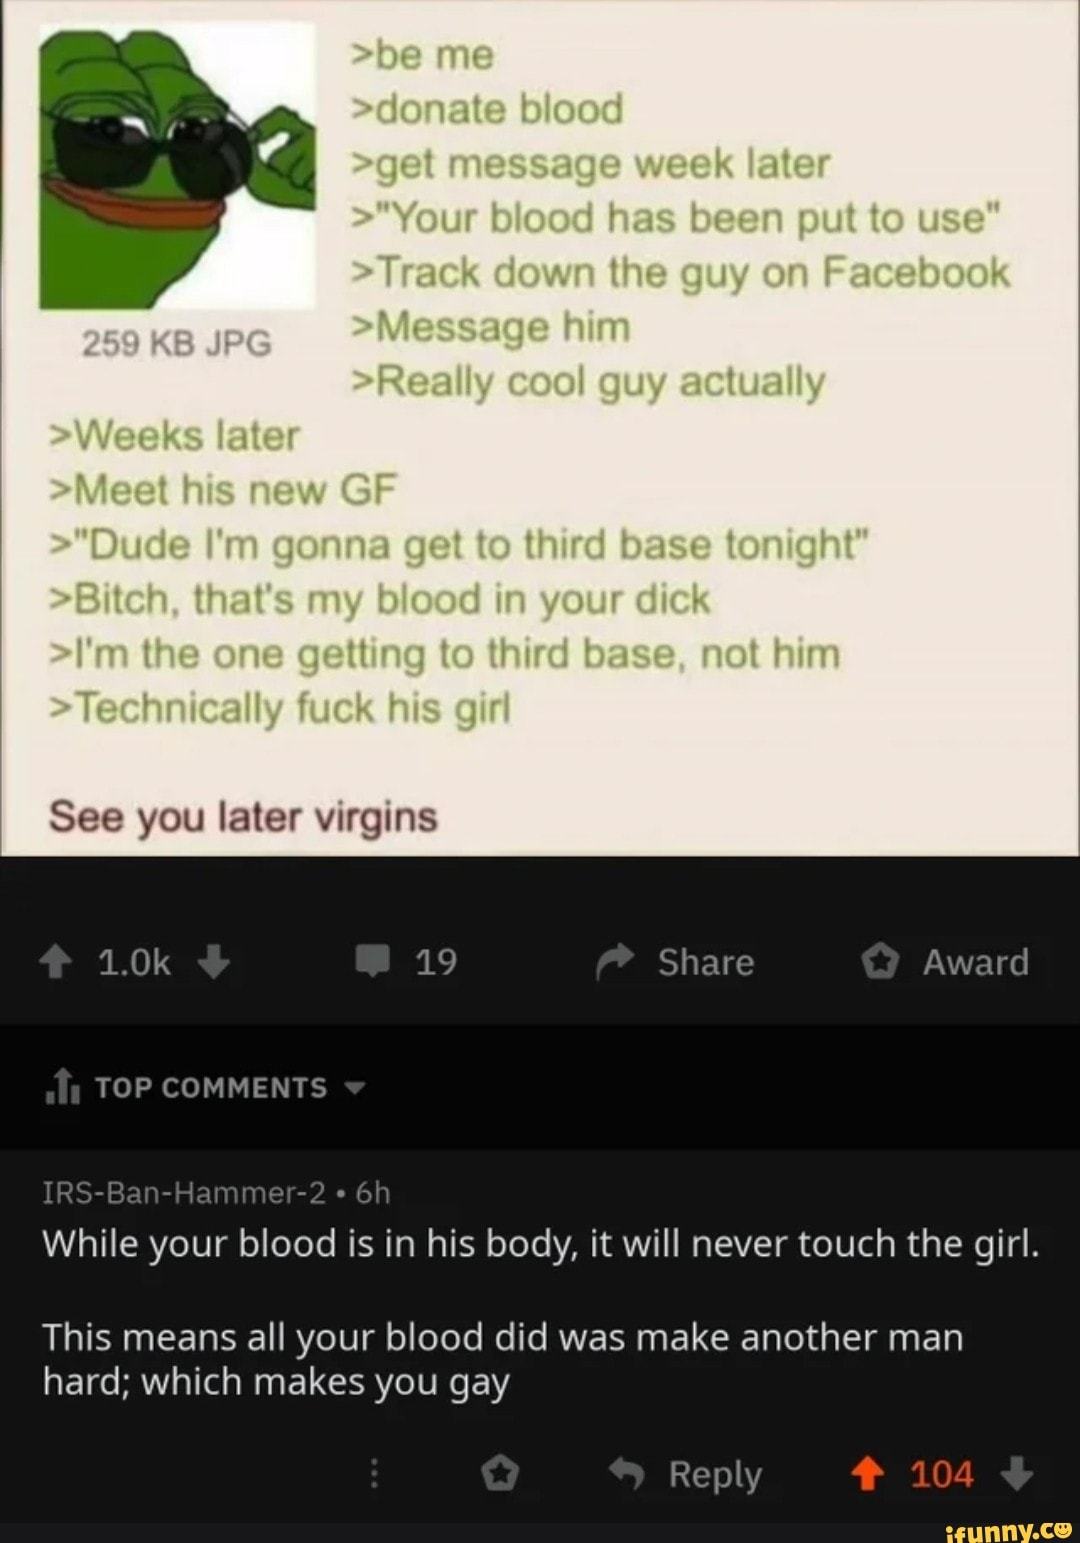 See You Later Virgins While Blood Is In His Body It Will Touch The Girl This Means All Your Blood Did Was Make Another Man Hard Which Makes You Gay